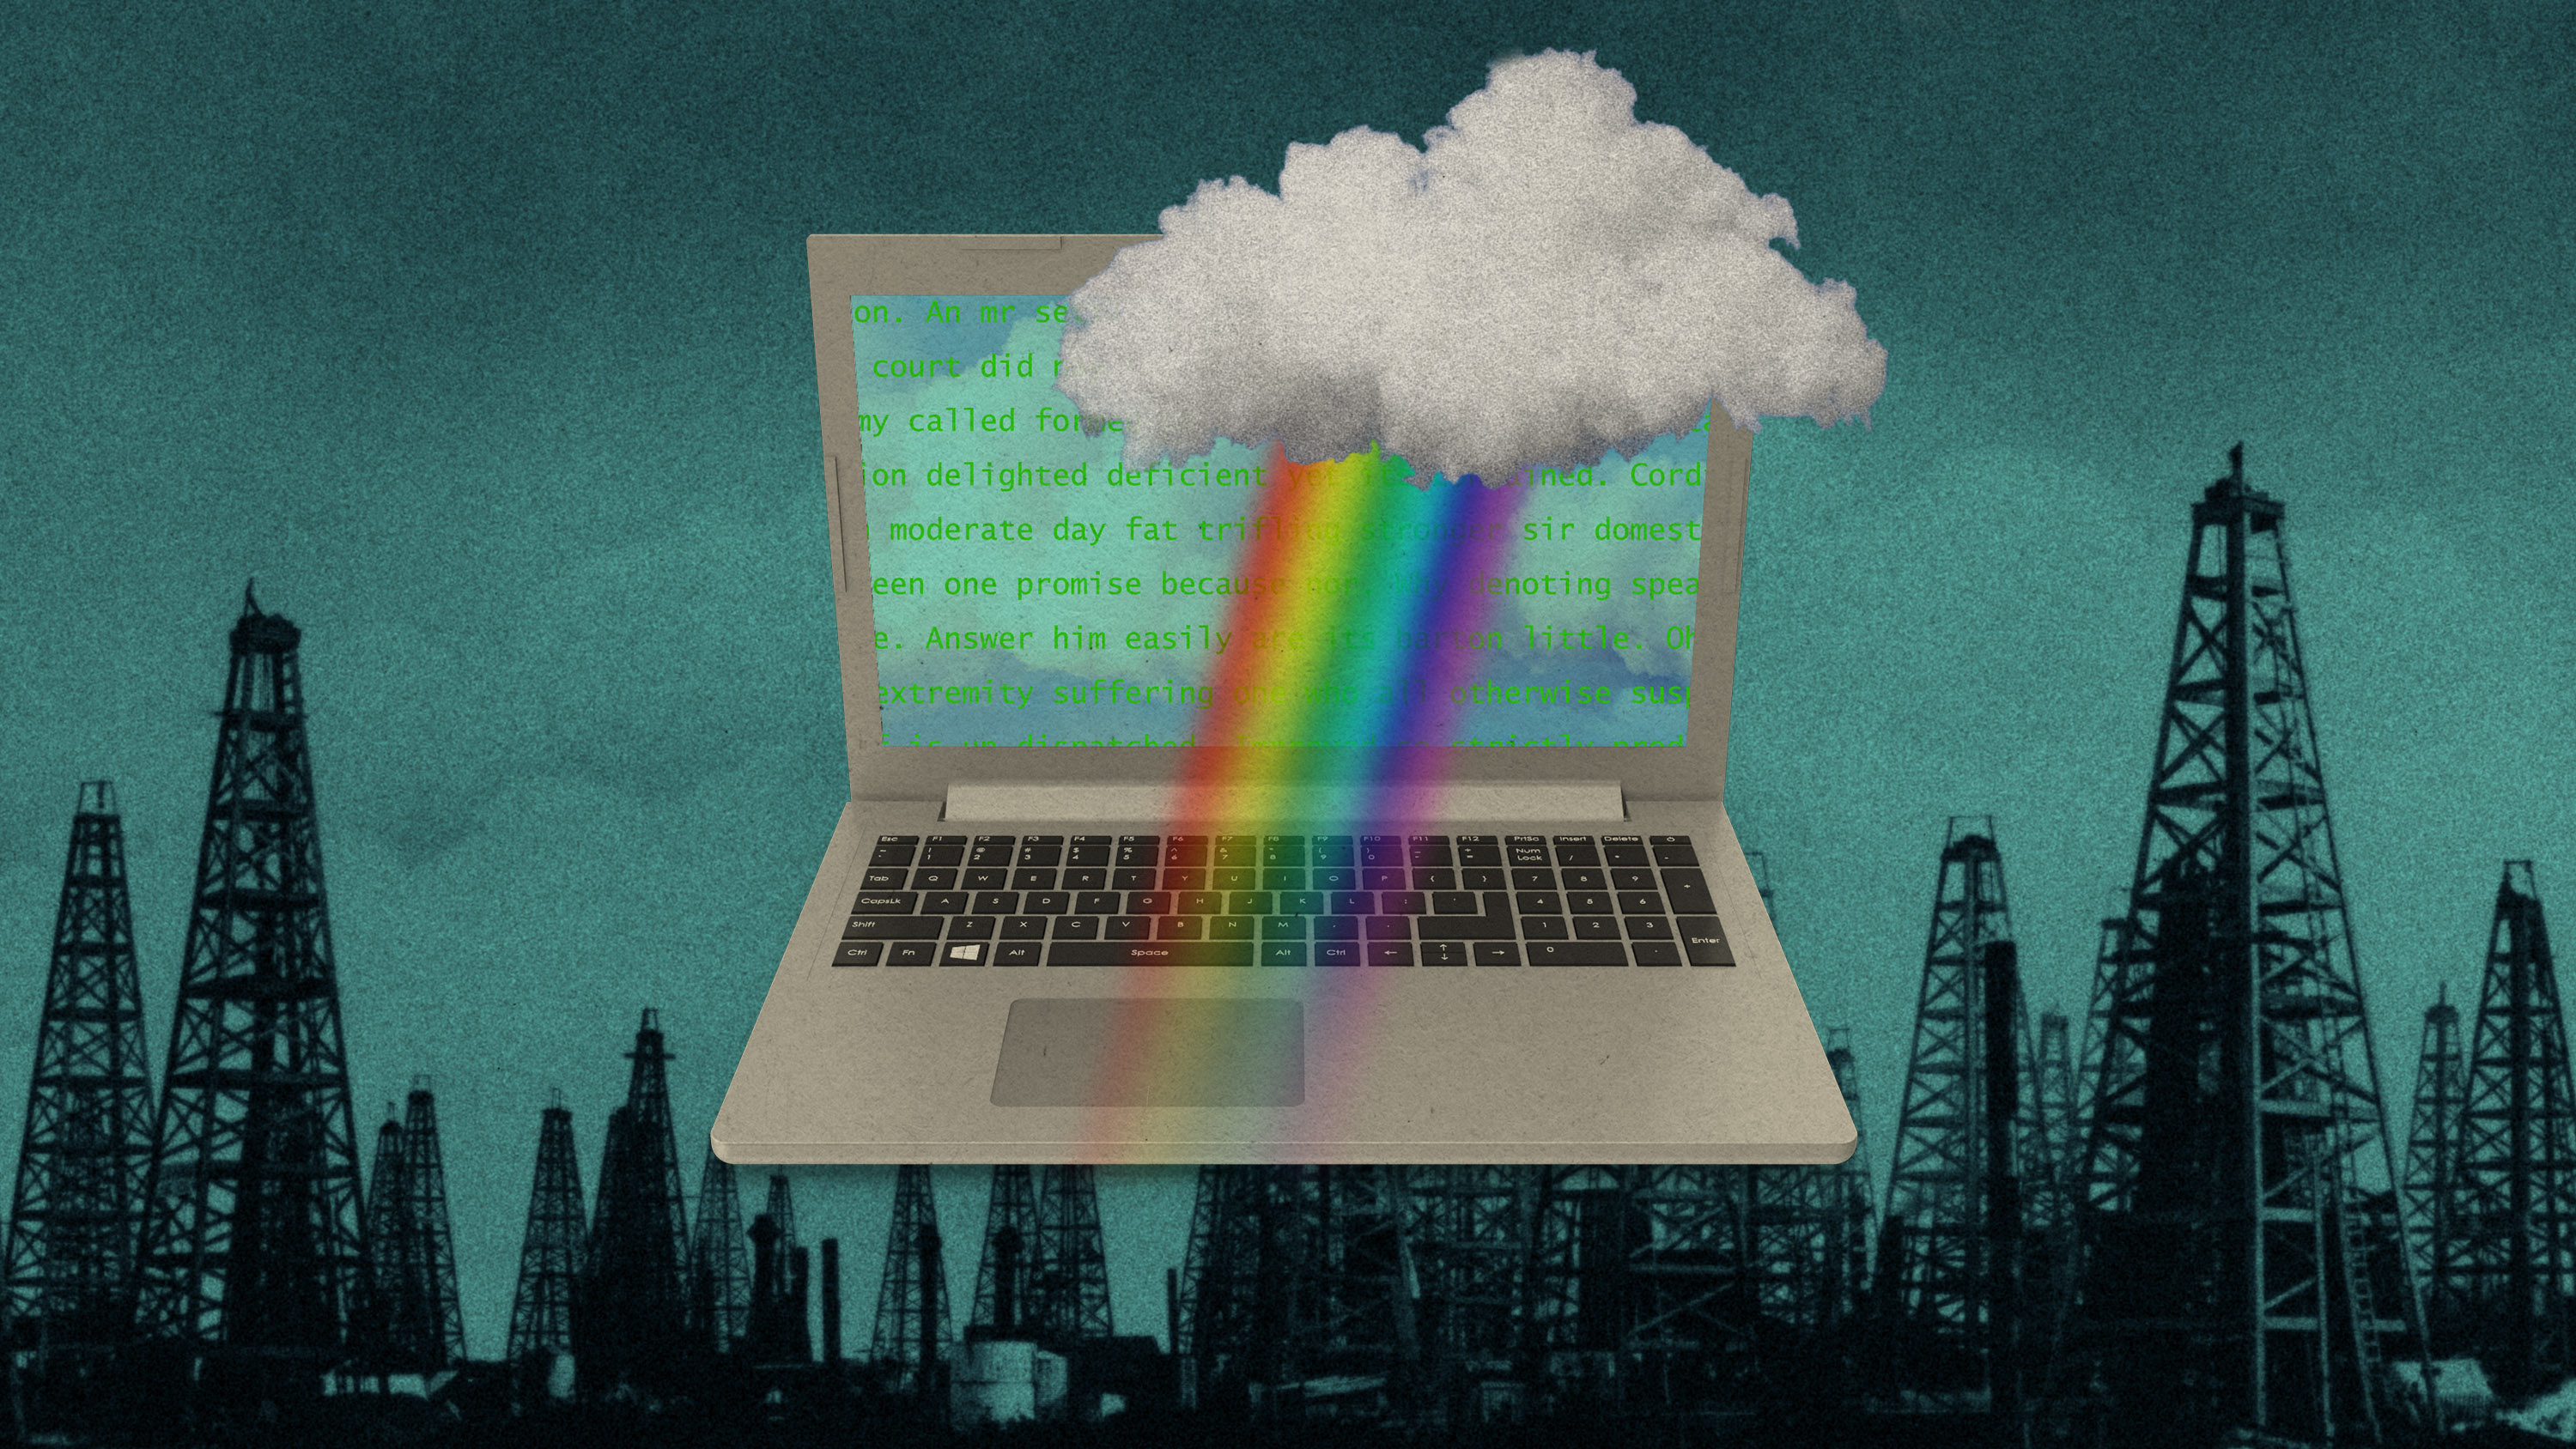 laptop generating text and the image of a rainbow cloud, hovers over an image of an oil field